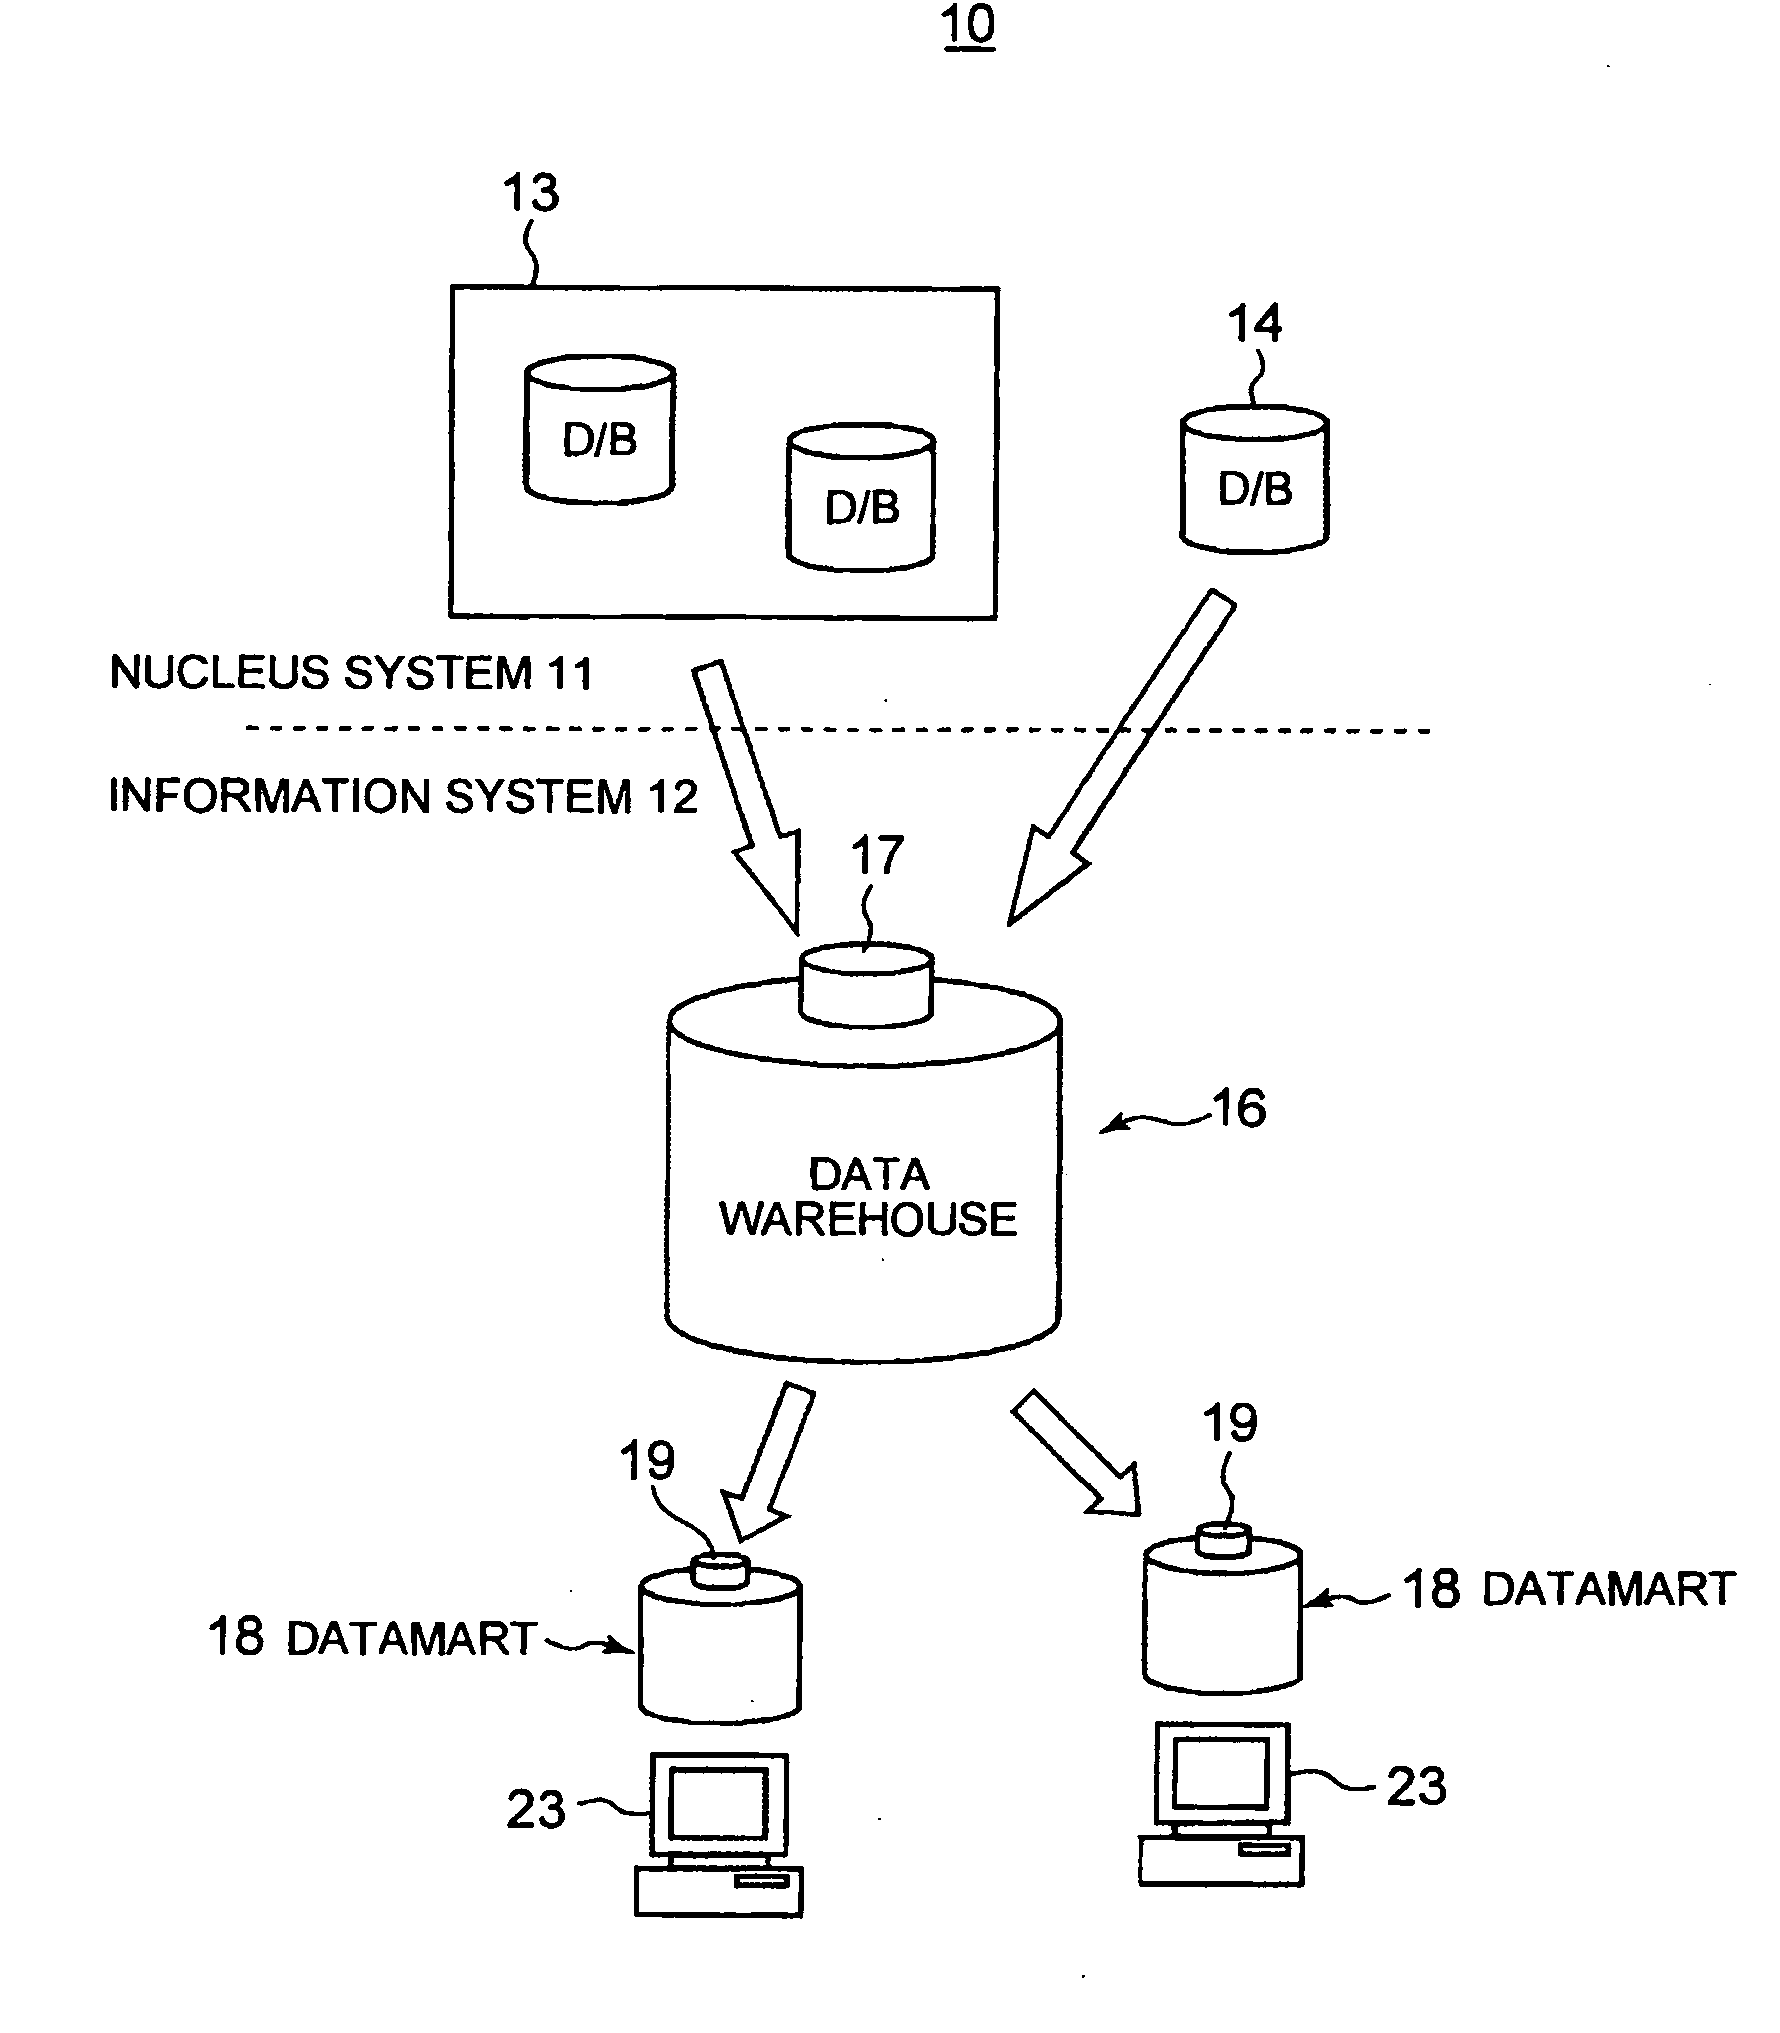 Method and apparatus for processing a dimension table and deriving a hierarchy therefrom